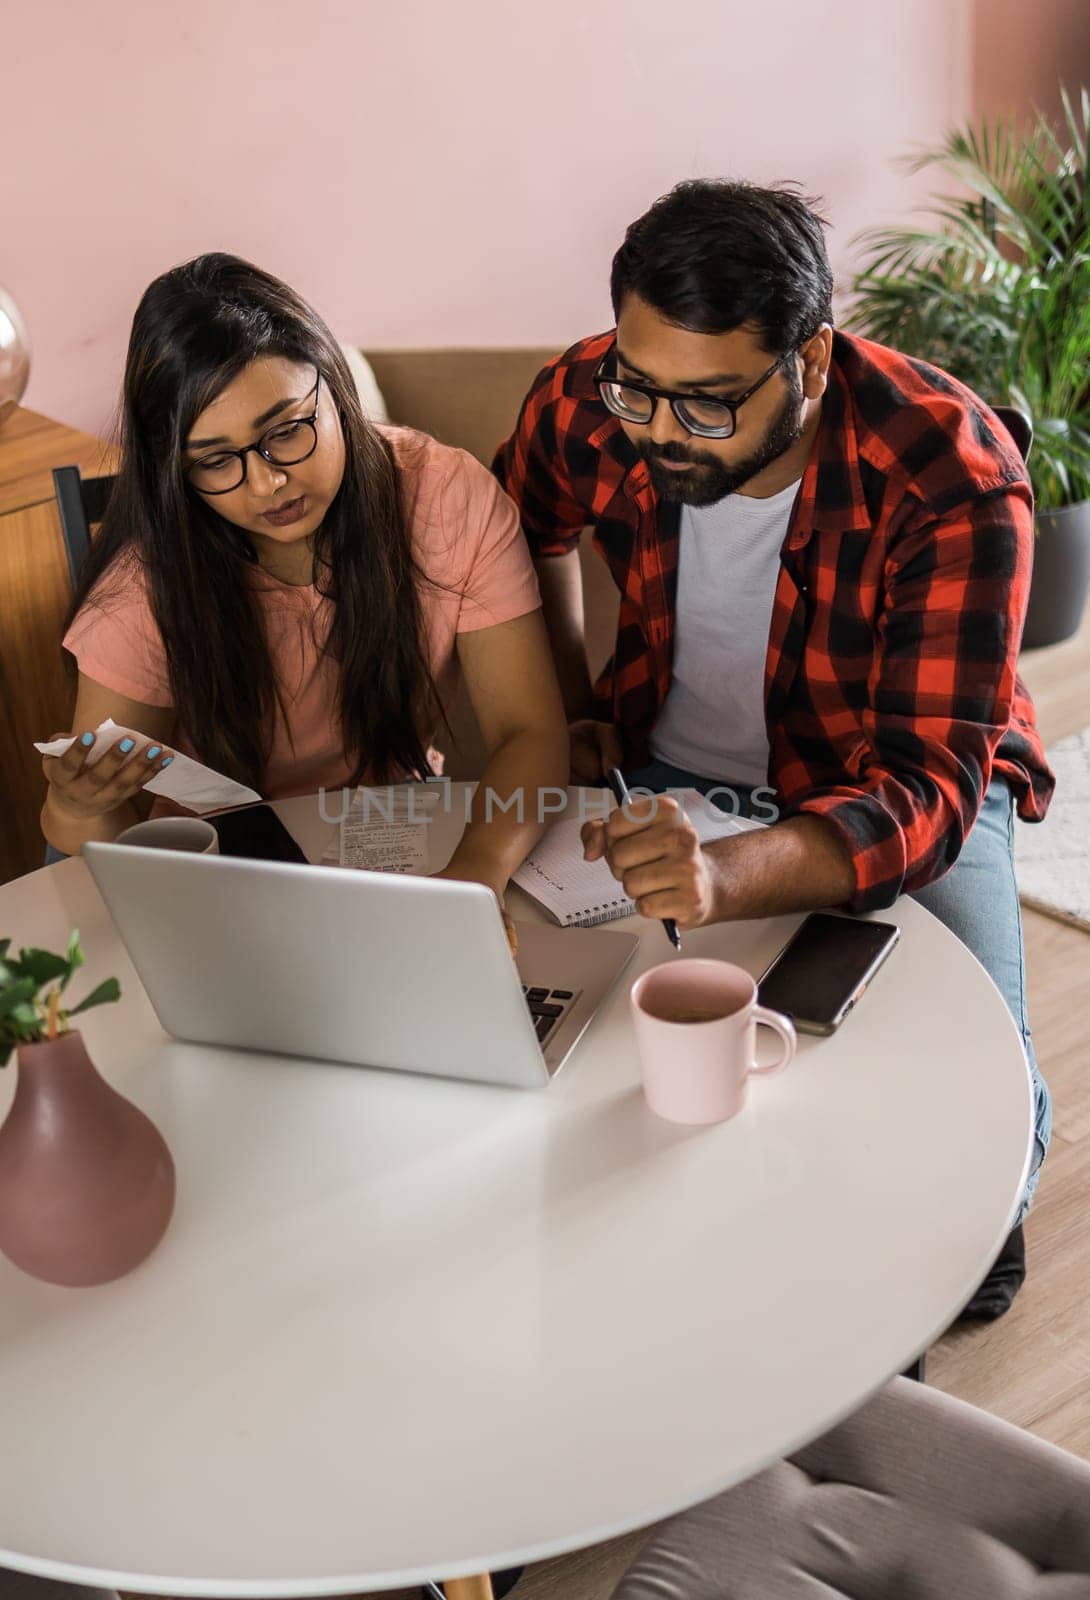 Serious wife and husband planning budget, checking finances, focused young woman using online calculator and counting bills or taxes, man using laptop, online banking services. Family sitting at table in kitchen - economic crisis concept by Satura86